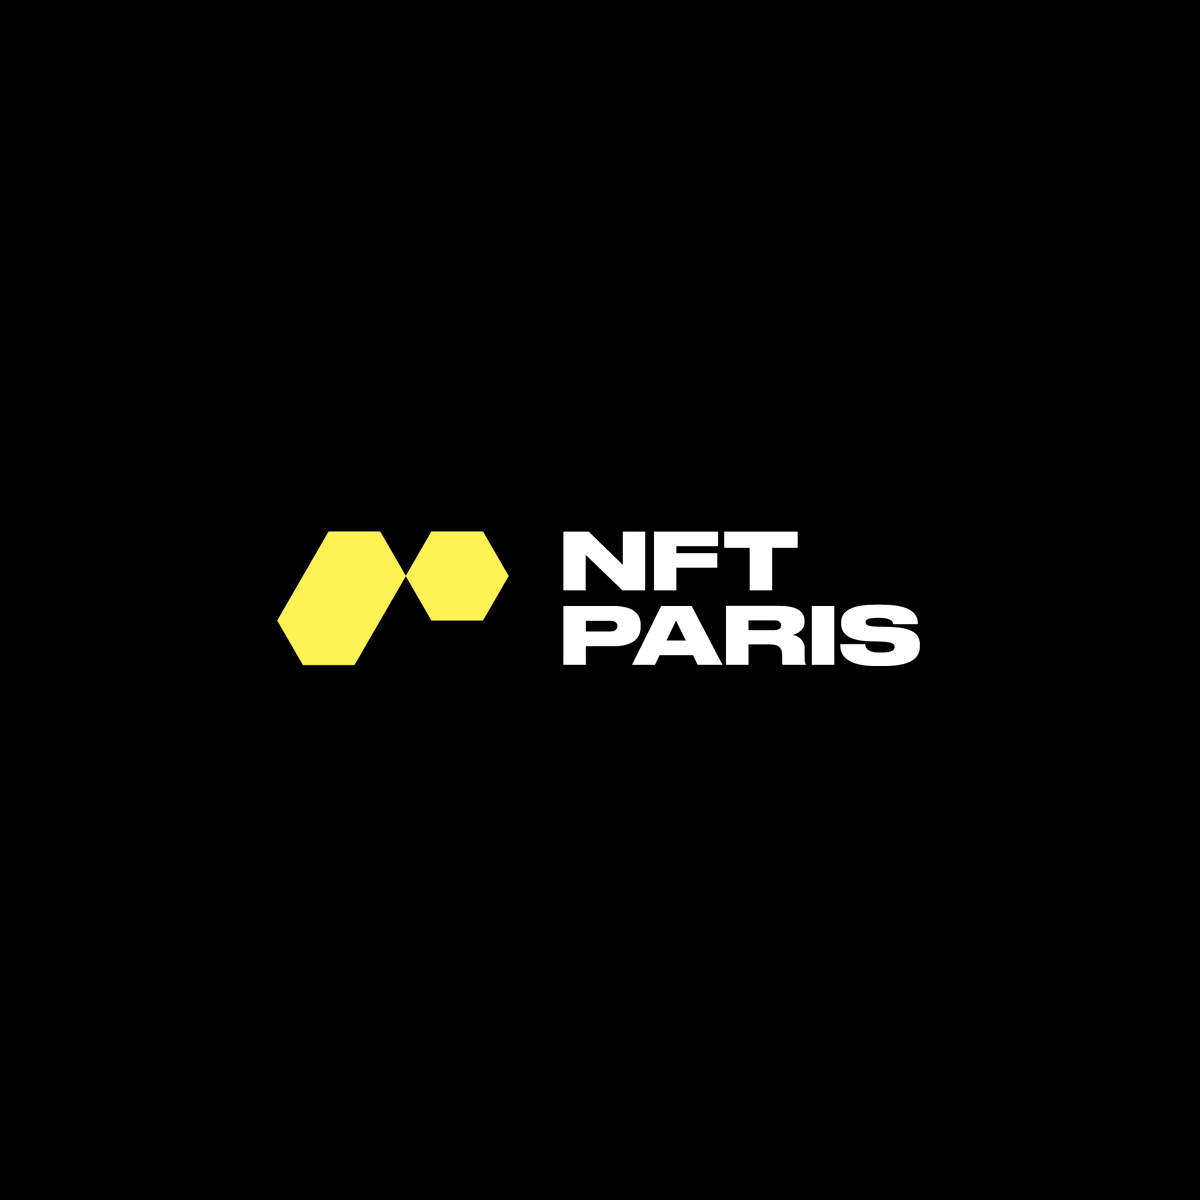 We're thrilled to sponsor #NFTParis, a gathering of some of the most innovative minds in Web3. Stop by our booth to say hi!